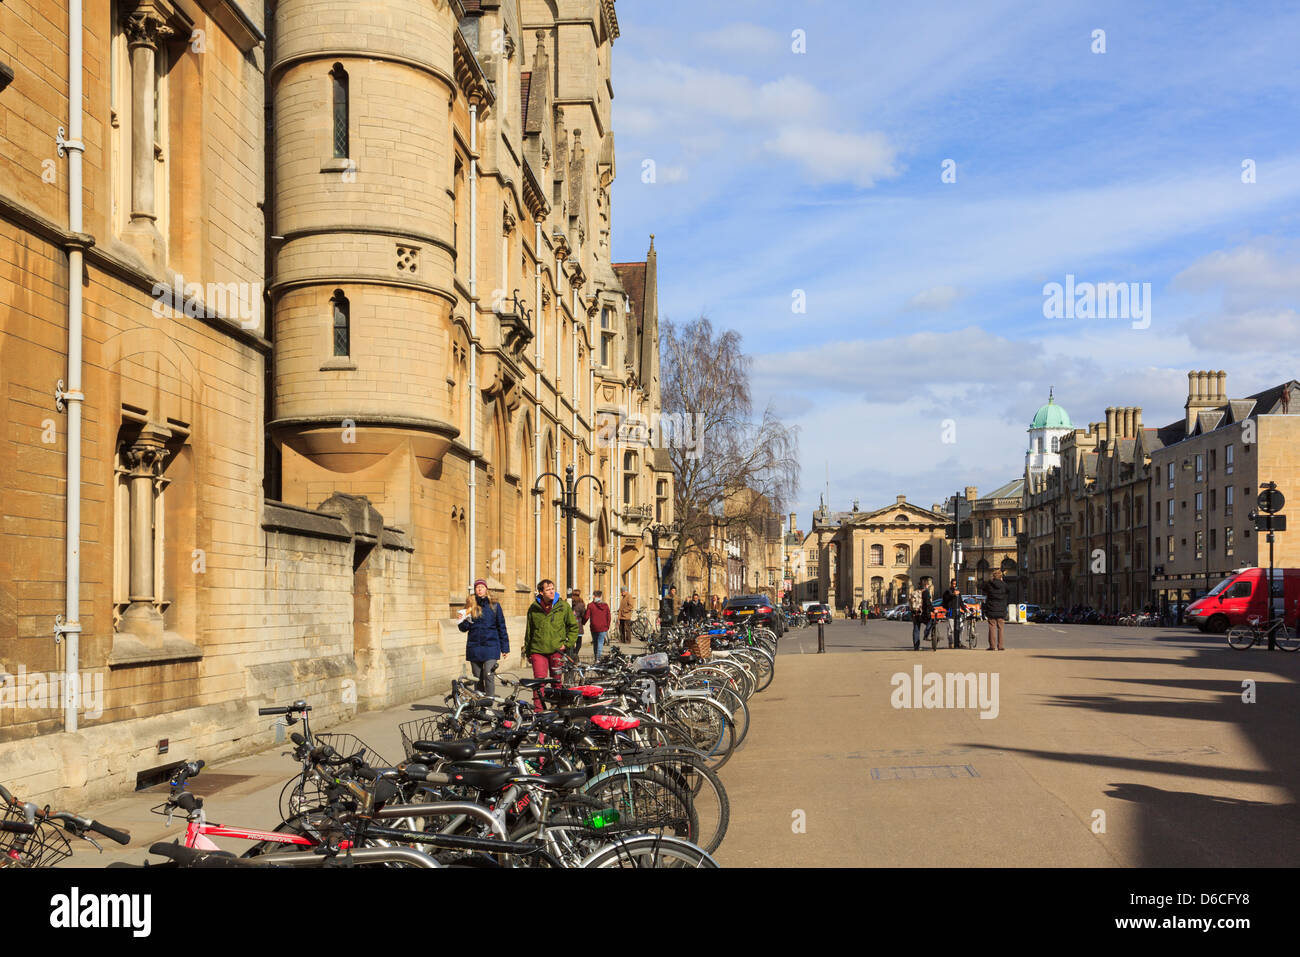 Oxford, Oxfordshire, England, UK. Street scene with bicycles parked in front of Balliol College Brackenbury Buildings (1867-68) Stock Photo